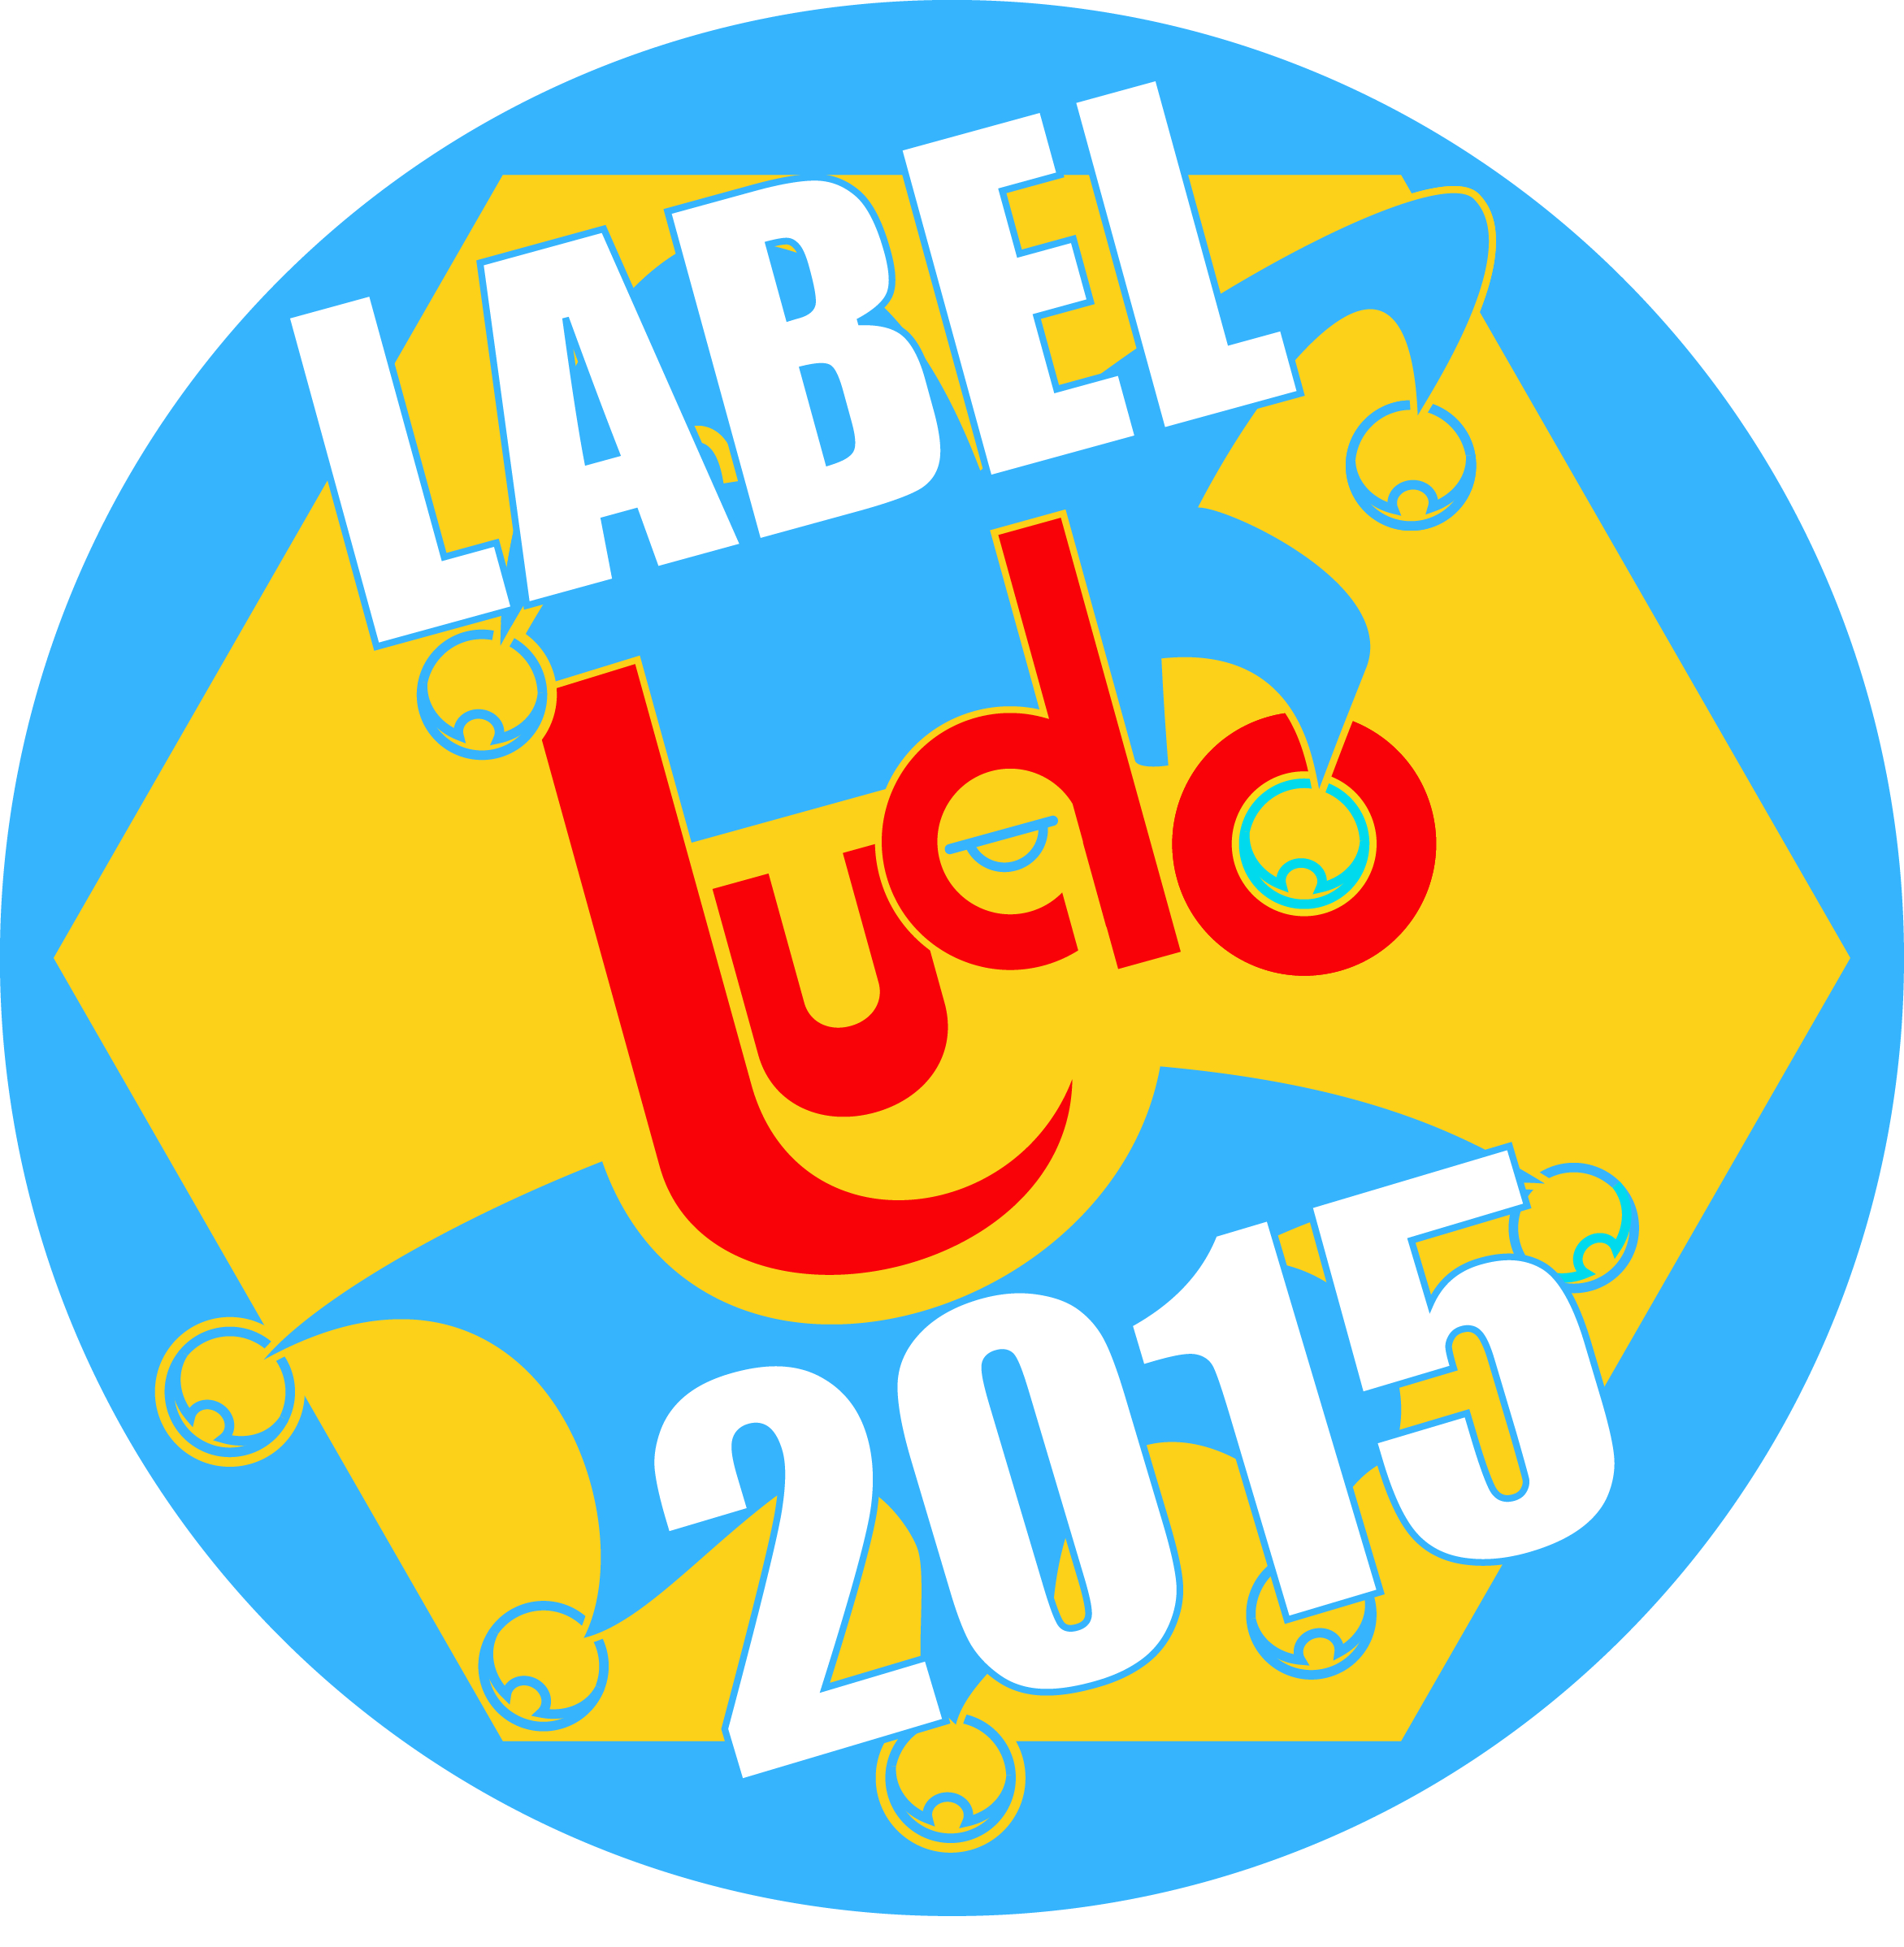 Label Ludo 2015… And the winner is…